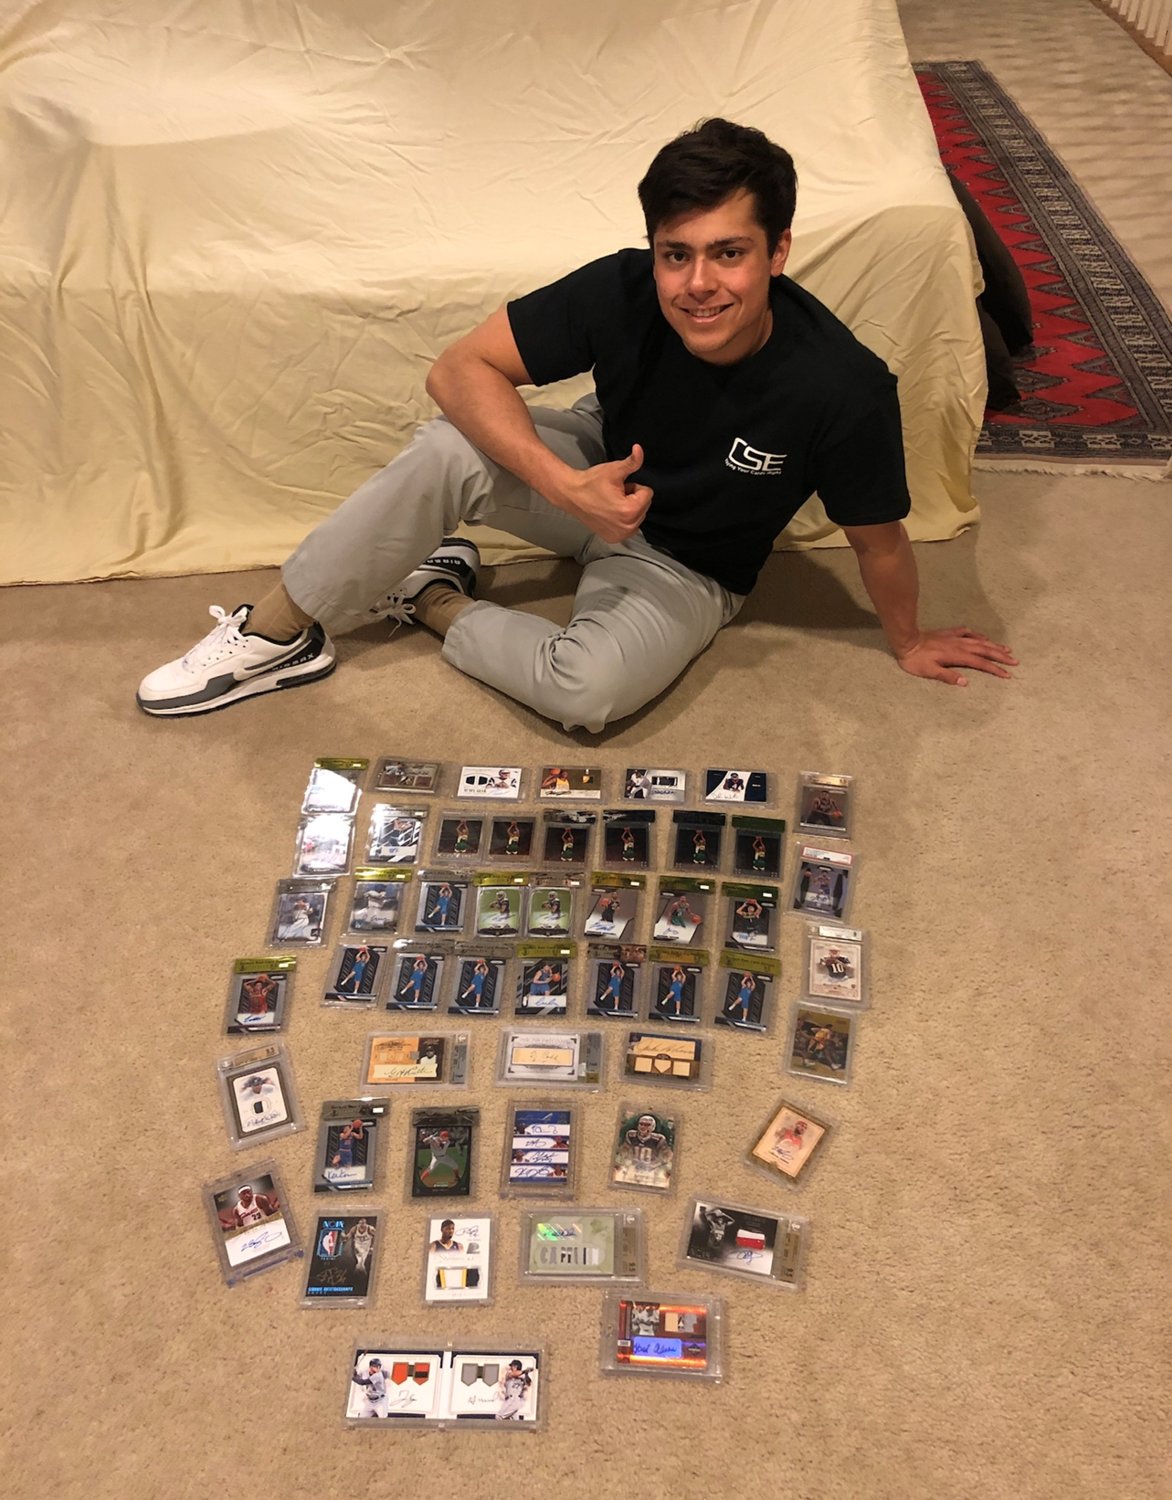 Zachary Lynch poses with a portion of his own collection of collectible sports cards. Lynch is a finance student at Texas A&M and has worked with two partners to form Card Stock Exchange, a website that tracks trading card value with a mindset that each card is a financial investment – not just a collectible.